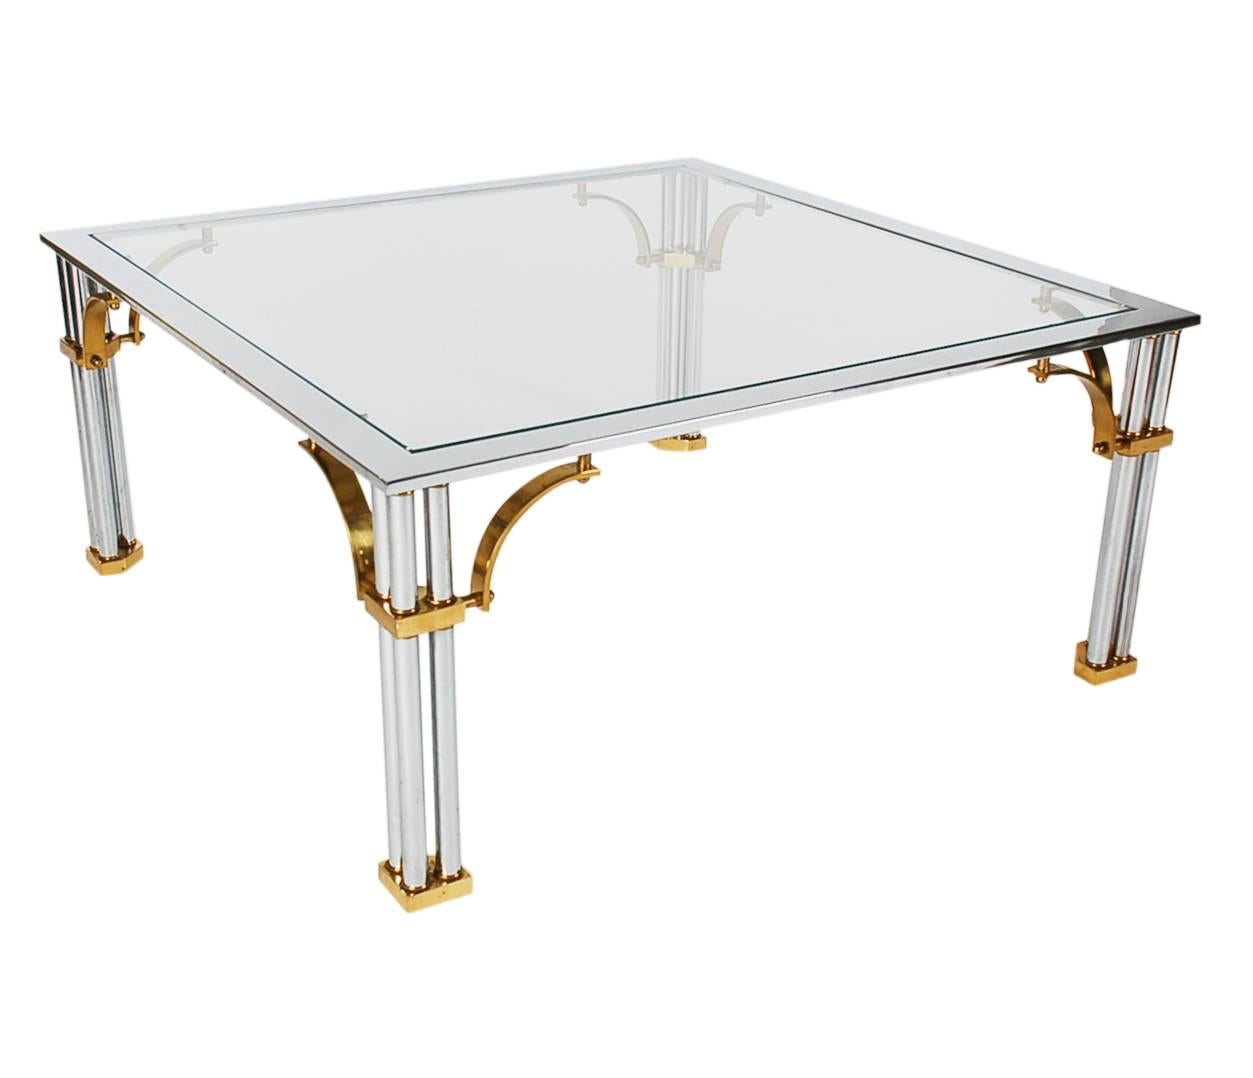 Italian Hollywood Regency Brass, Chrome and Glass Square Cocktail Table, Maison Jansen